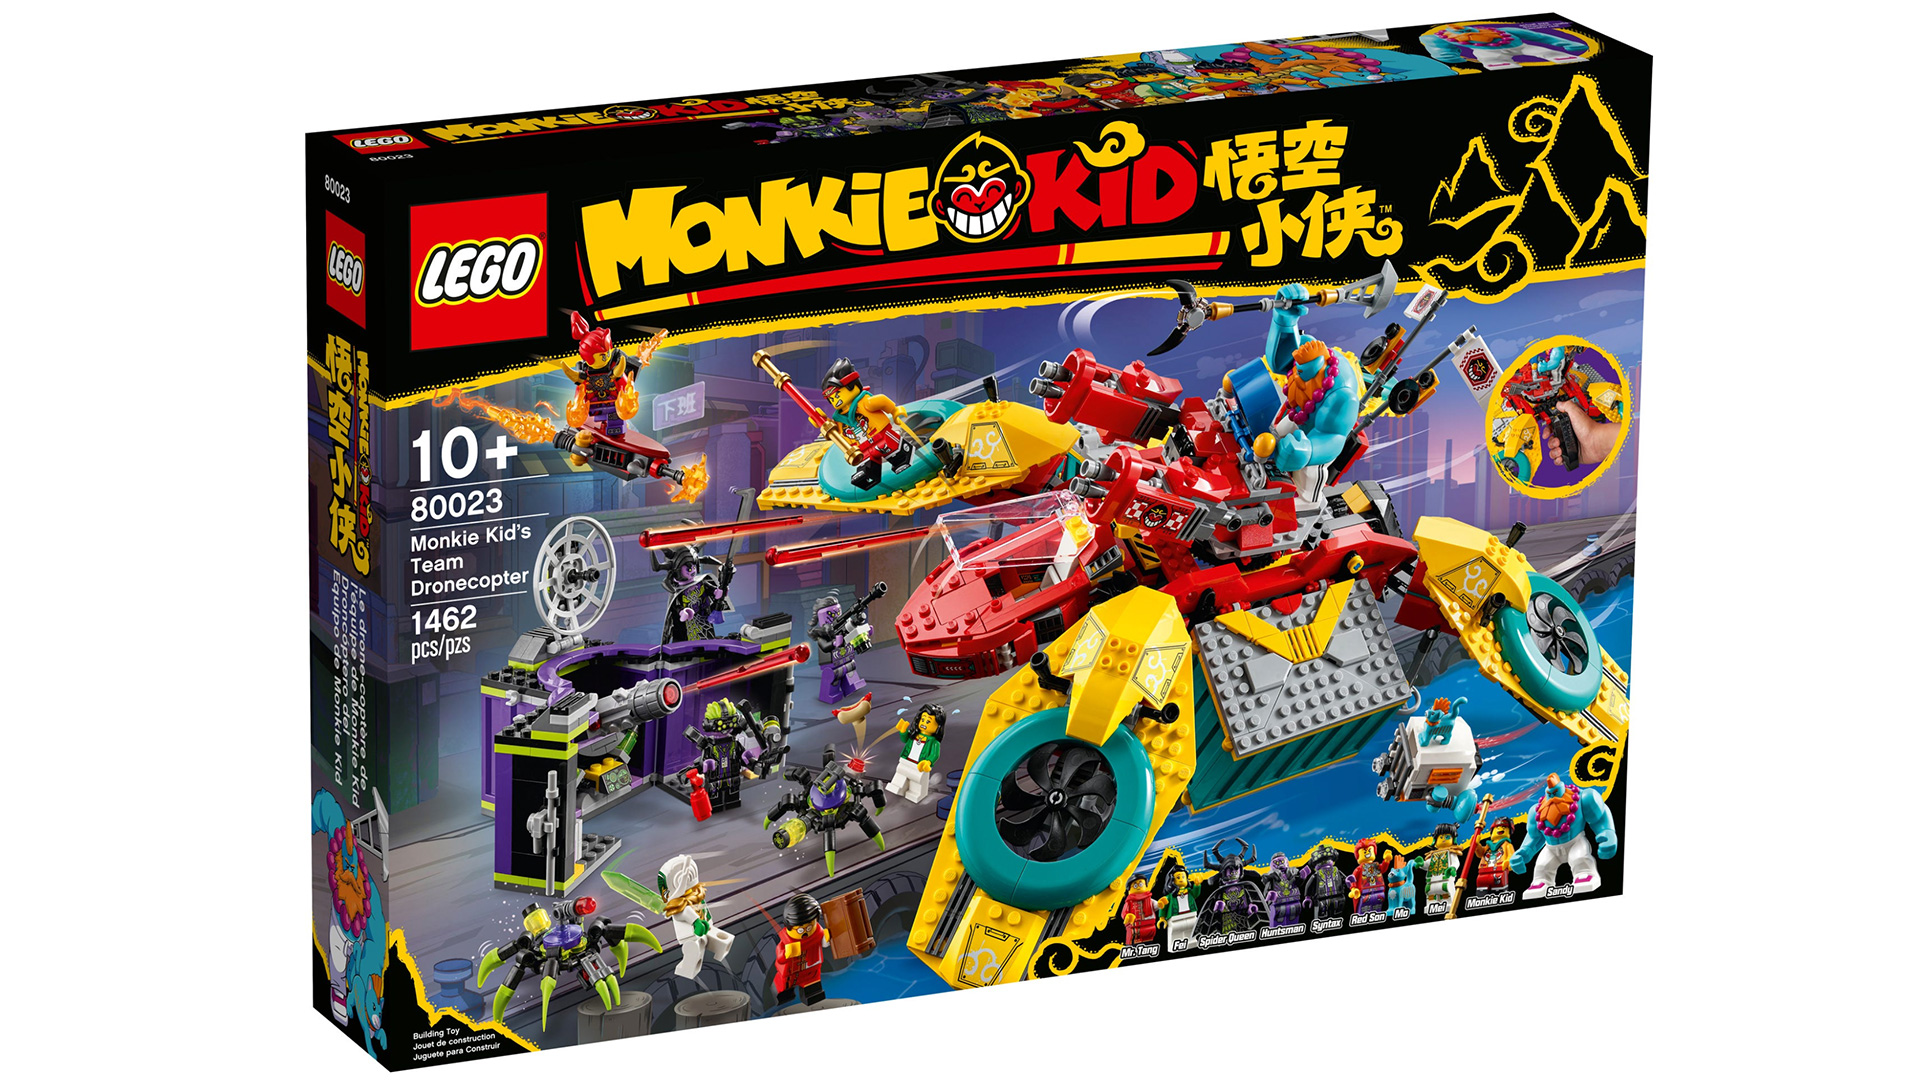 Children can become heroes in their own epic stories and wow their friends with Monkie Kid’s Team Dronecopter. This LEGO® Monkie Kid™ helicopter toy (80023) features 2 spring-loaded shooters and 2 detachable ‘cargo containers’ with lots of homely features inside, including bunk beds and a buildable arcade machine. The playset includes 8 minifigures and 2 figures, including Monkie Kid, Mei, Sandy, Mo the cat, Spider Queen, Mr. Tang with a Journey to the West book element and Red Son with a flyer, plus a spring-loaded ‘spider poison’ shooter for battle action.